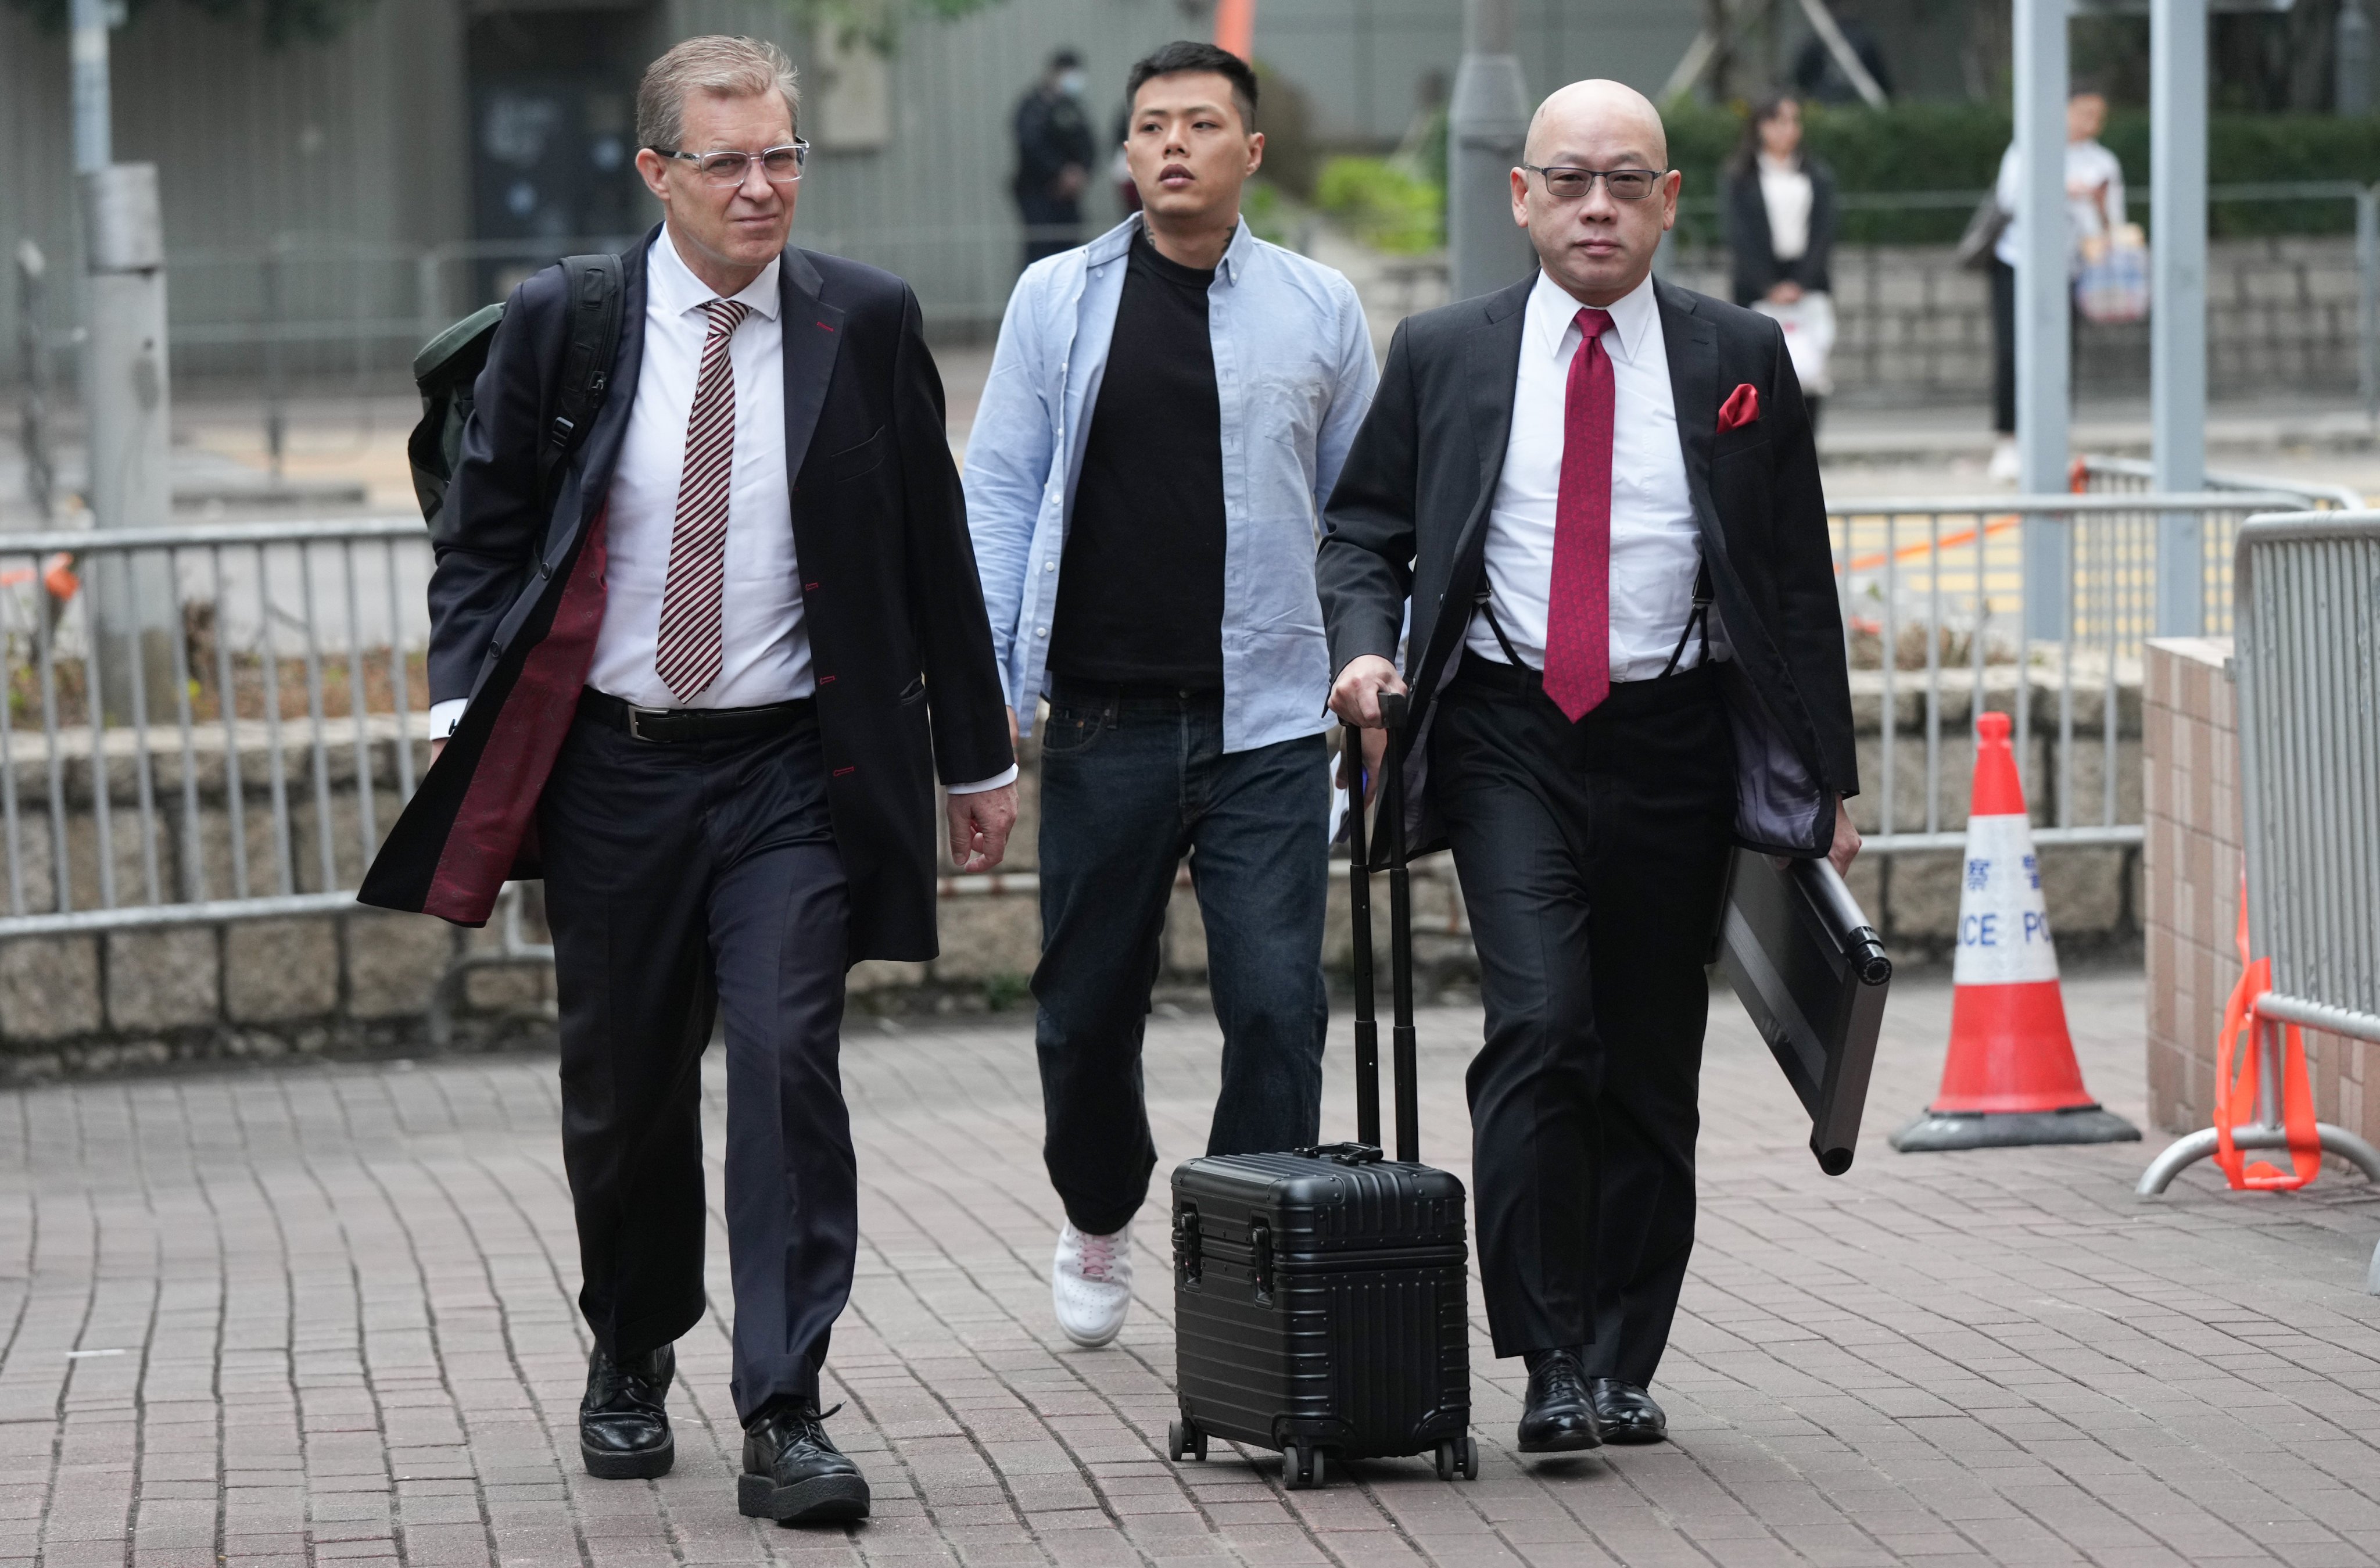 Jimmy Lai’s lawyers Robert Pang (right) and Marc Corlett head to court last week. Photo: Eugene Lee